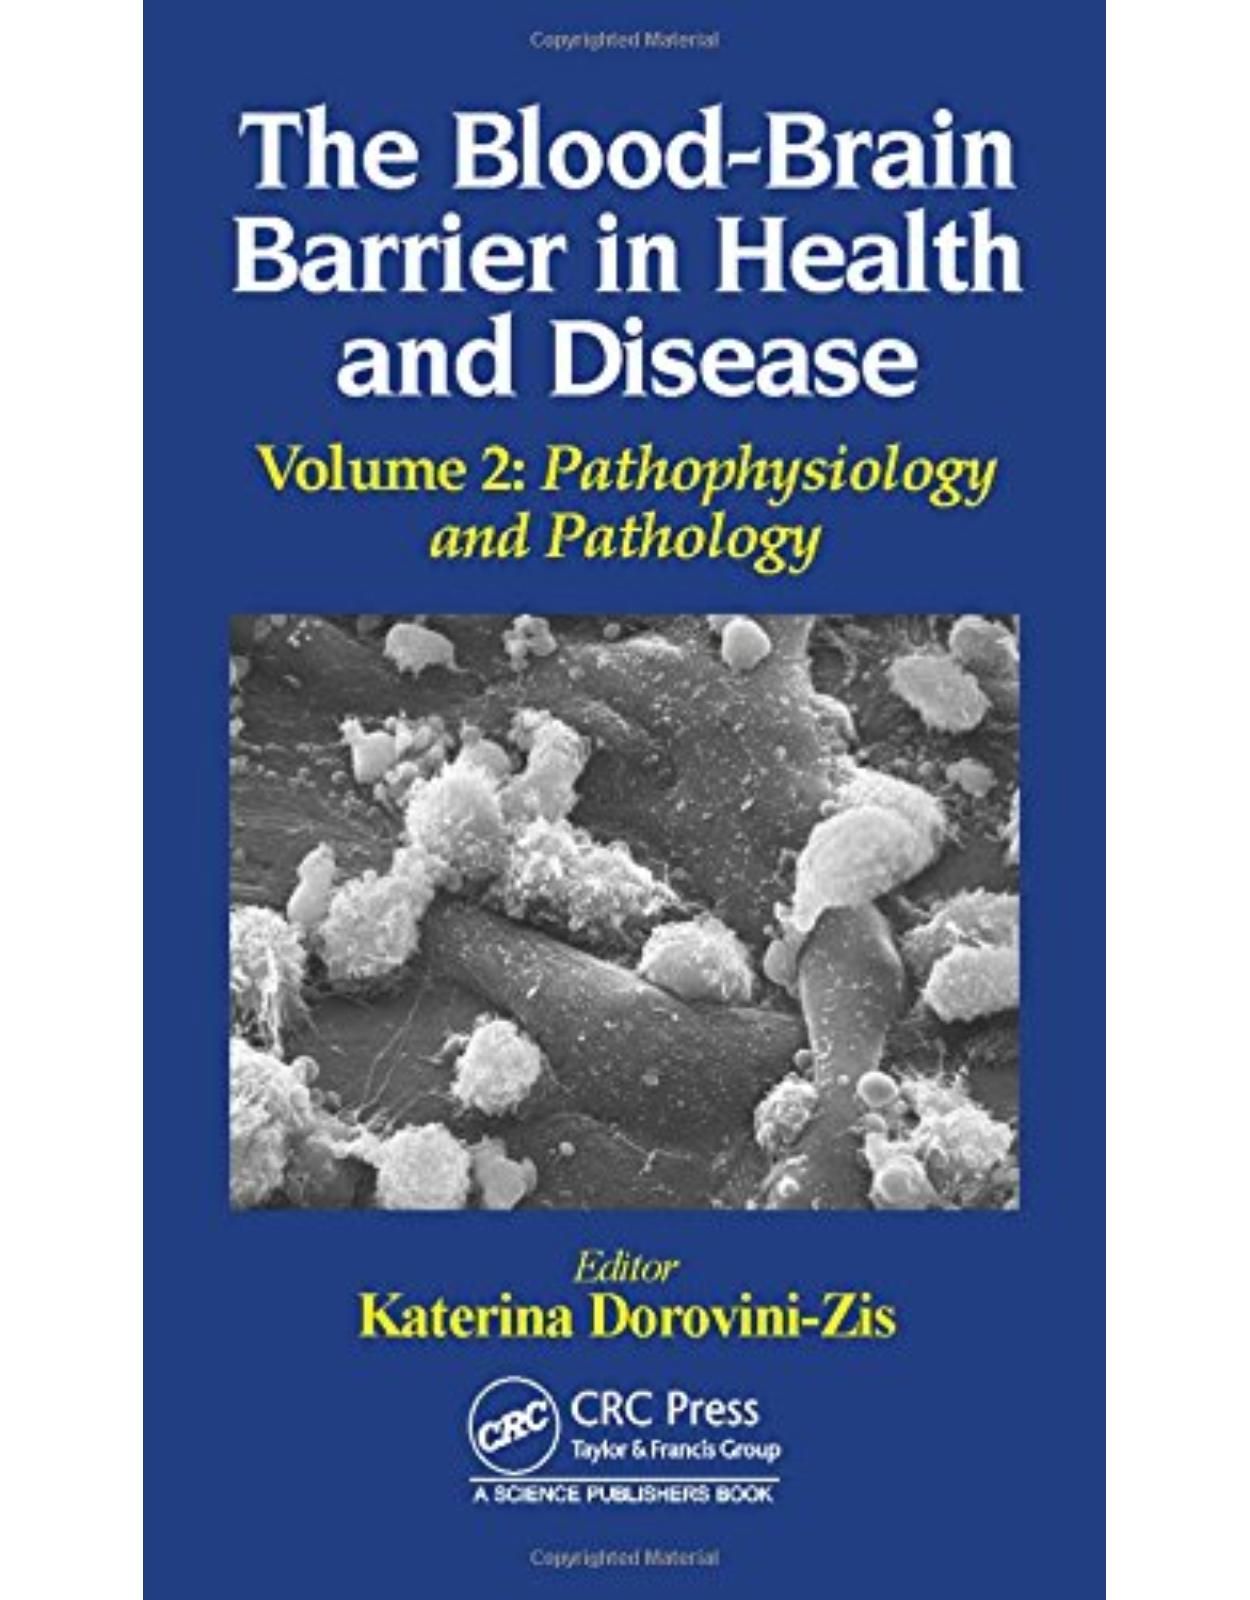 The Blood-Brain Barrier in Health and Disease, Volume Two: Pathophysiology and Pathology